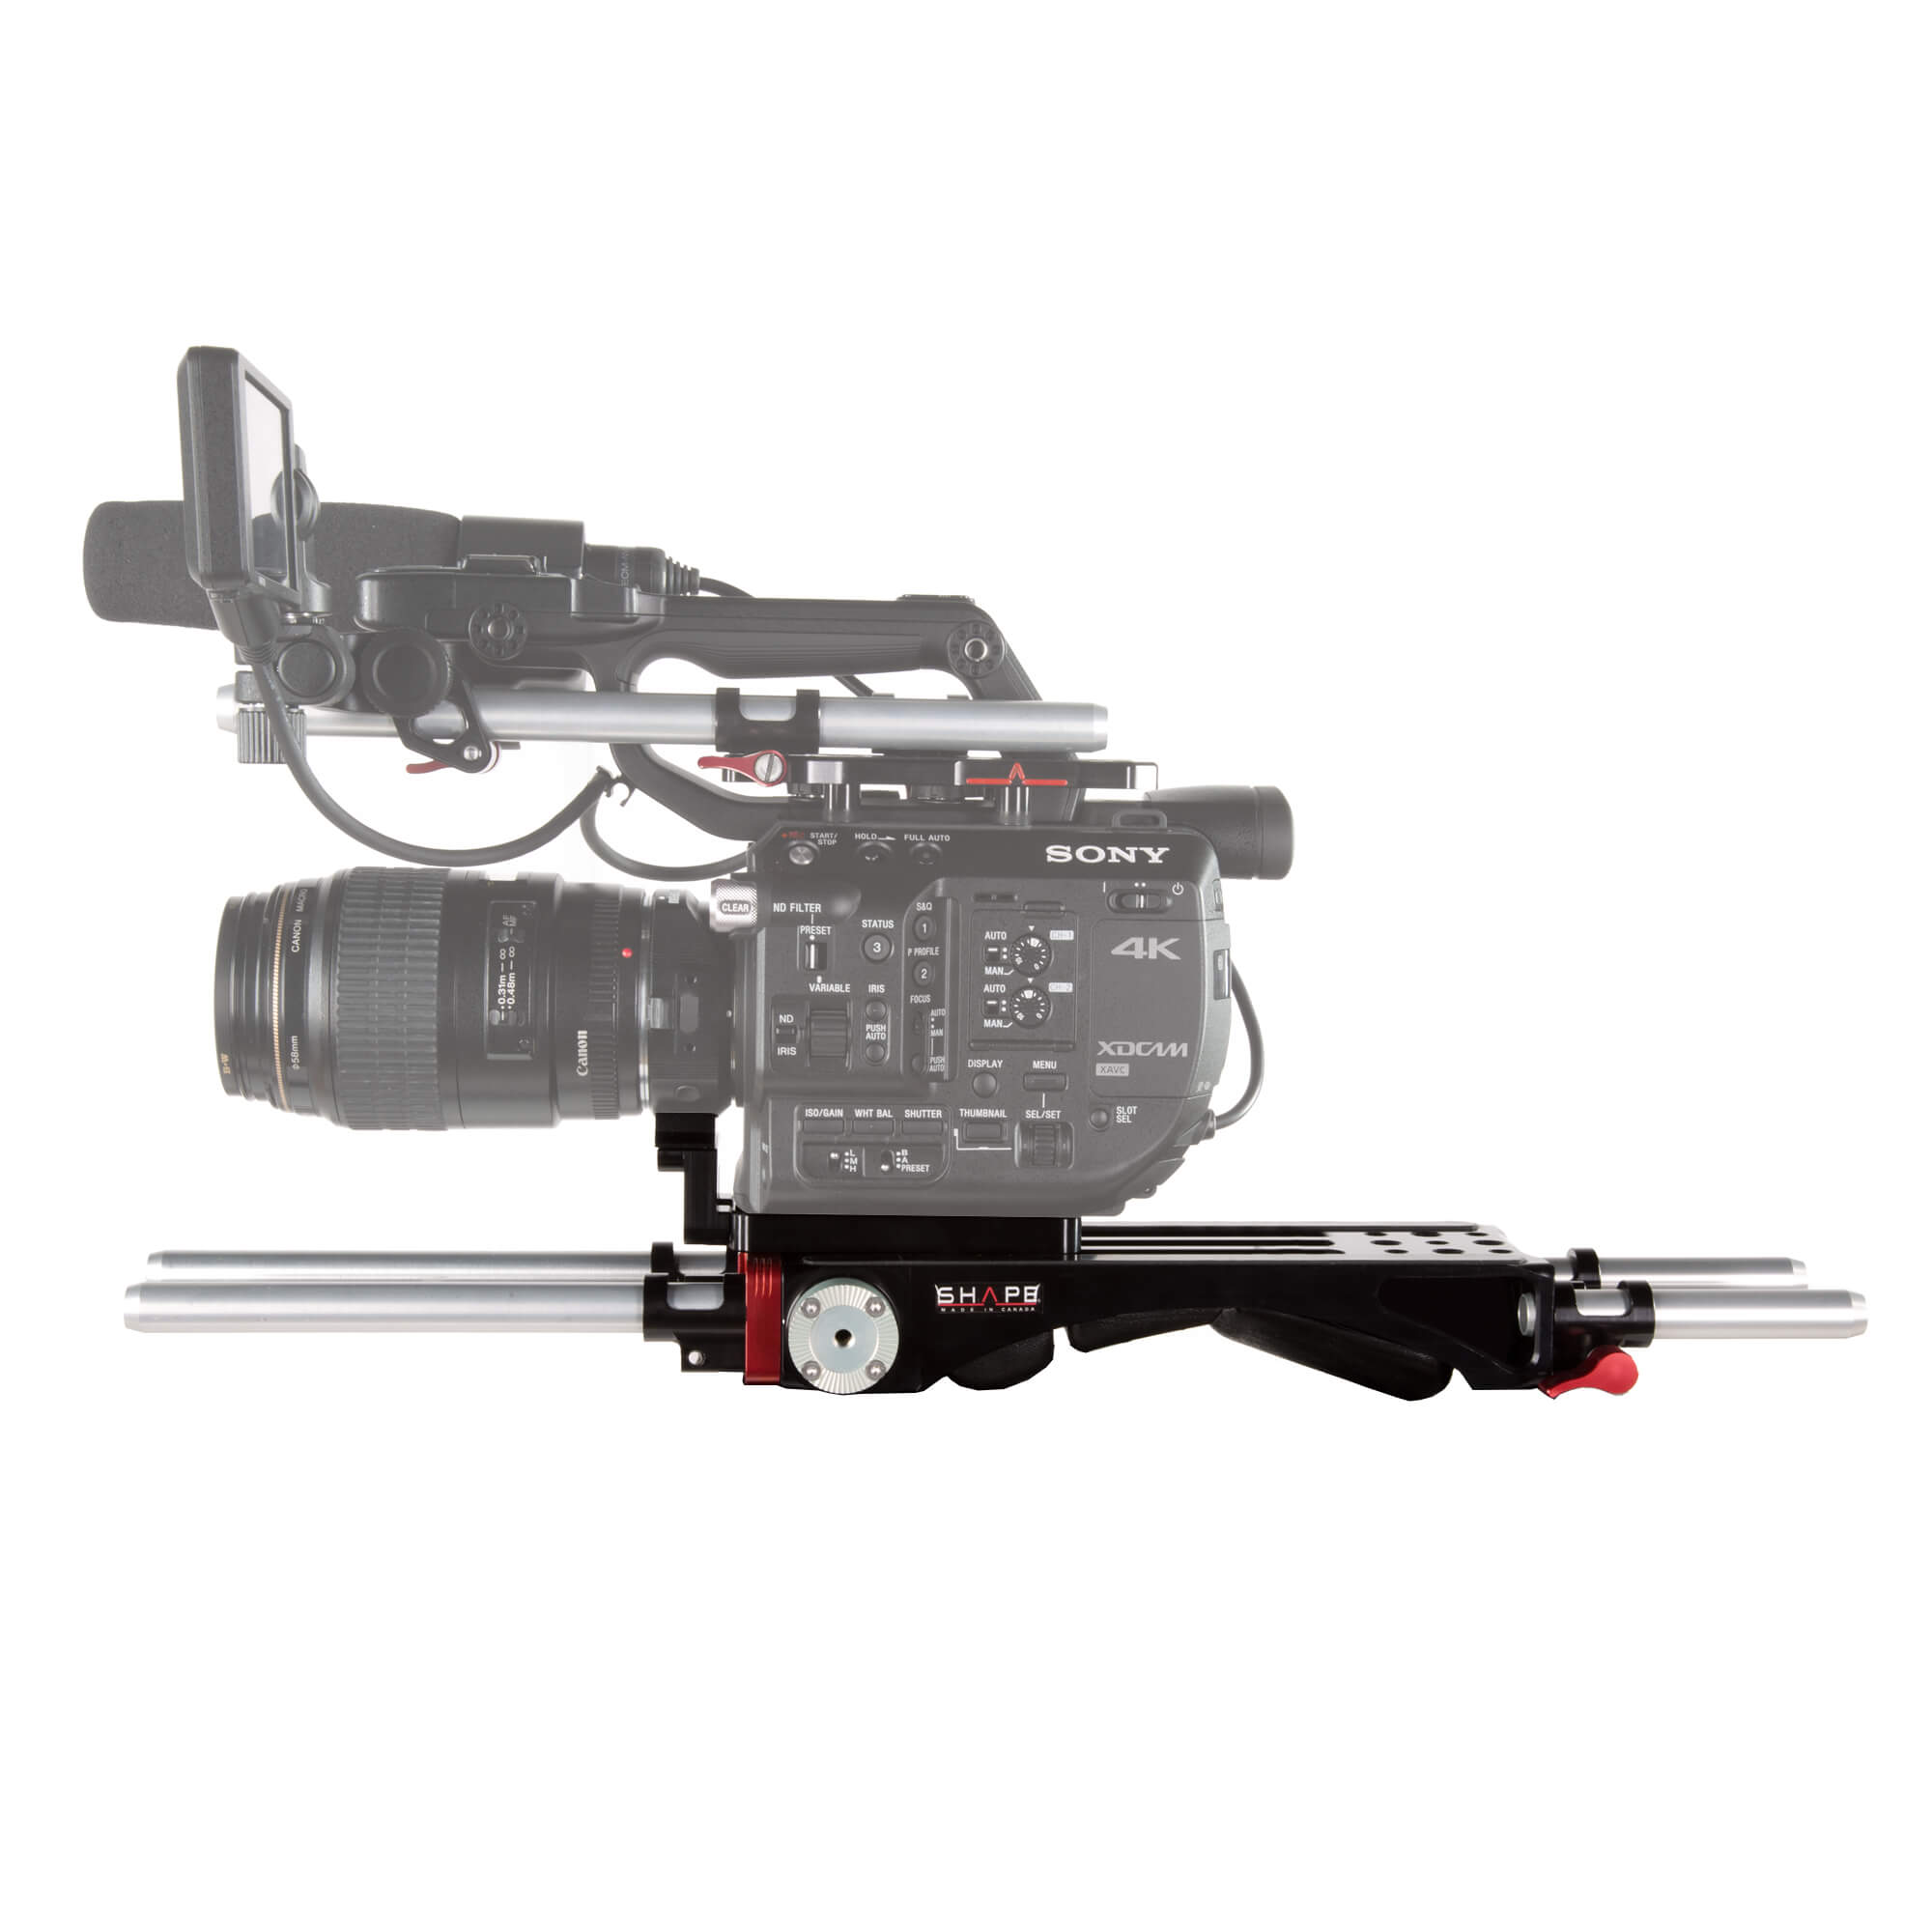 SHAPE V-Lock Quick Release Baseplate with Metabones Support for Sony FS5/FS5 II